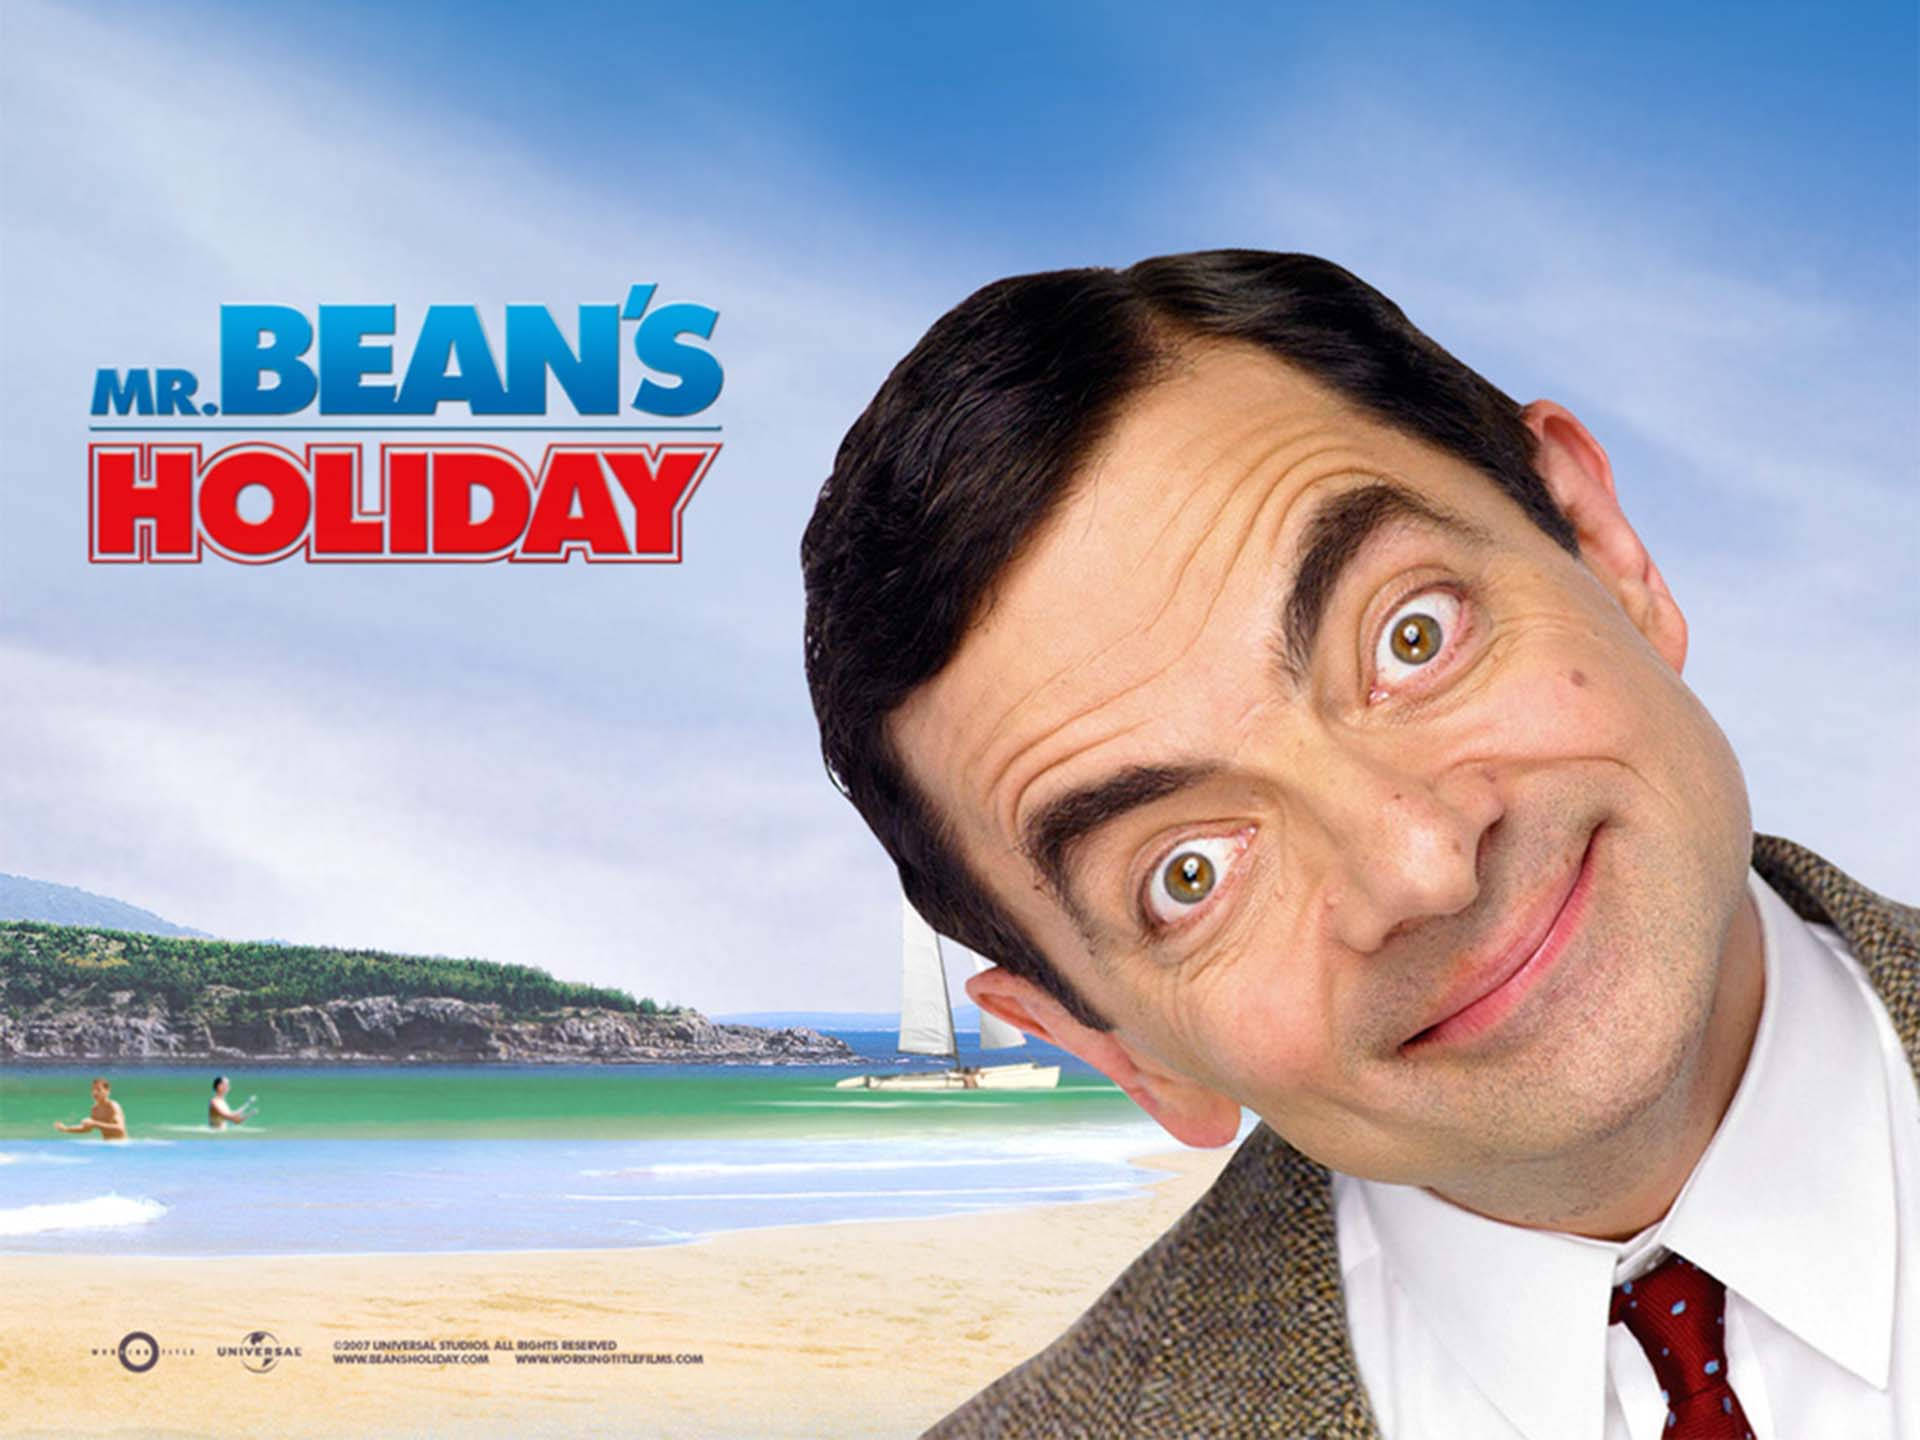 Mr. Bean Holiday Movie Poster Background